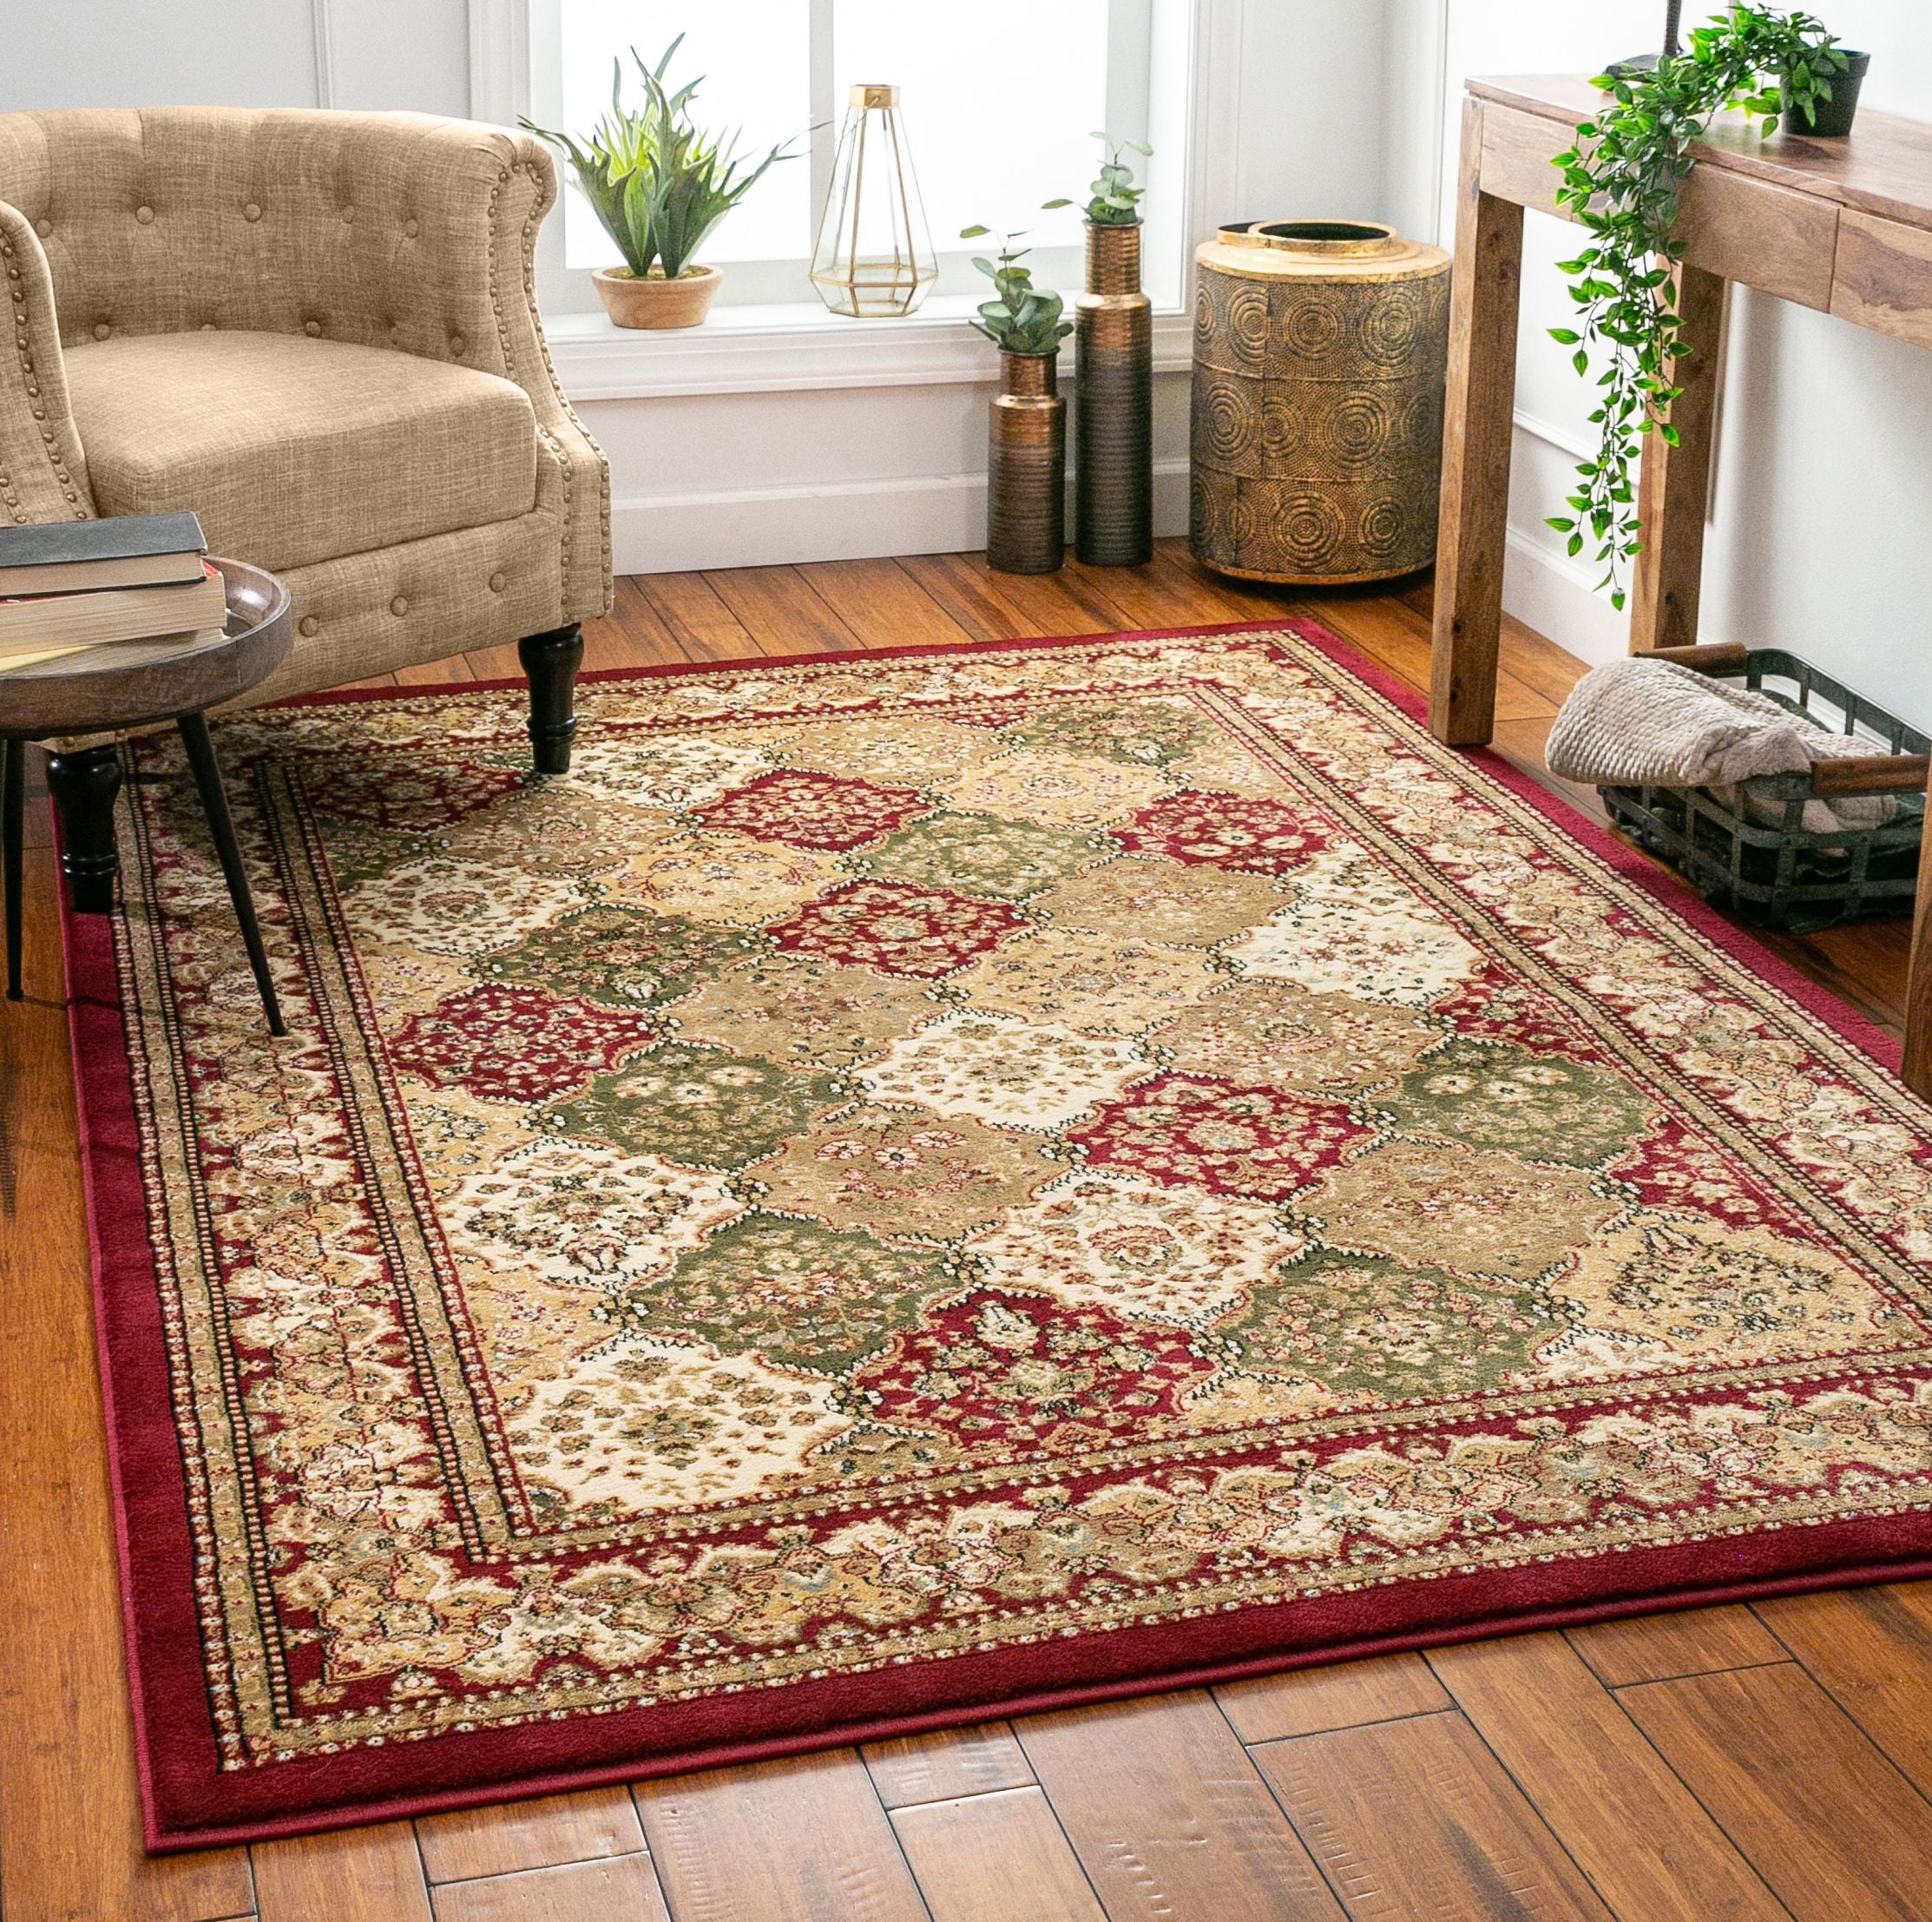 Monarch Panel Multi Color Red Oriental Area Rug Persian Formal Traditional Area Rug 4 X 5 Easy Clean Stain Fade Resistant Shed Free Modern Classic Contemporary Thick Soft Plush Living Dining Room